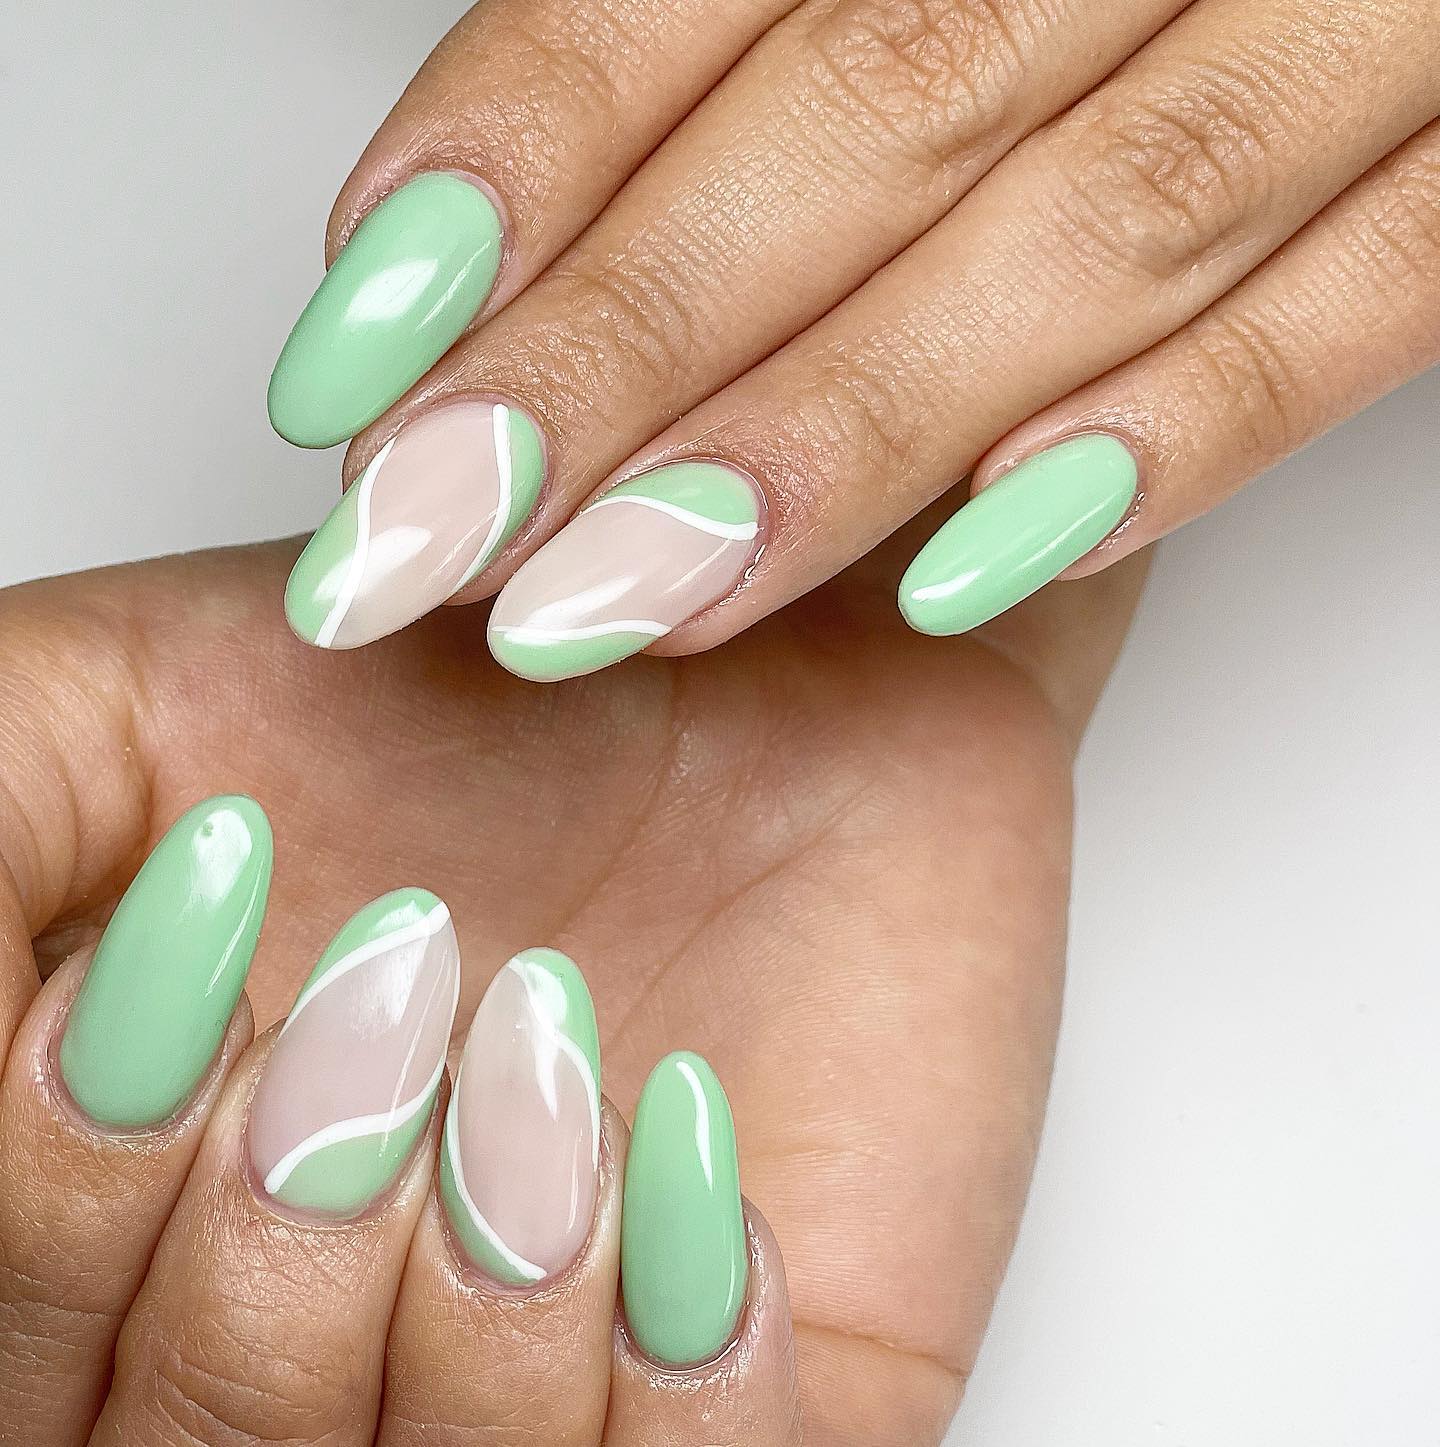 Light green is for those who like pastel colors. If you want to have a chic nail design, try this out.